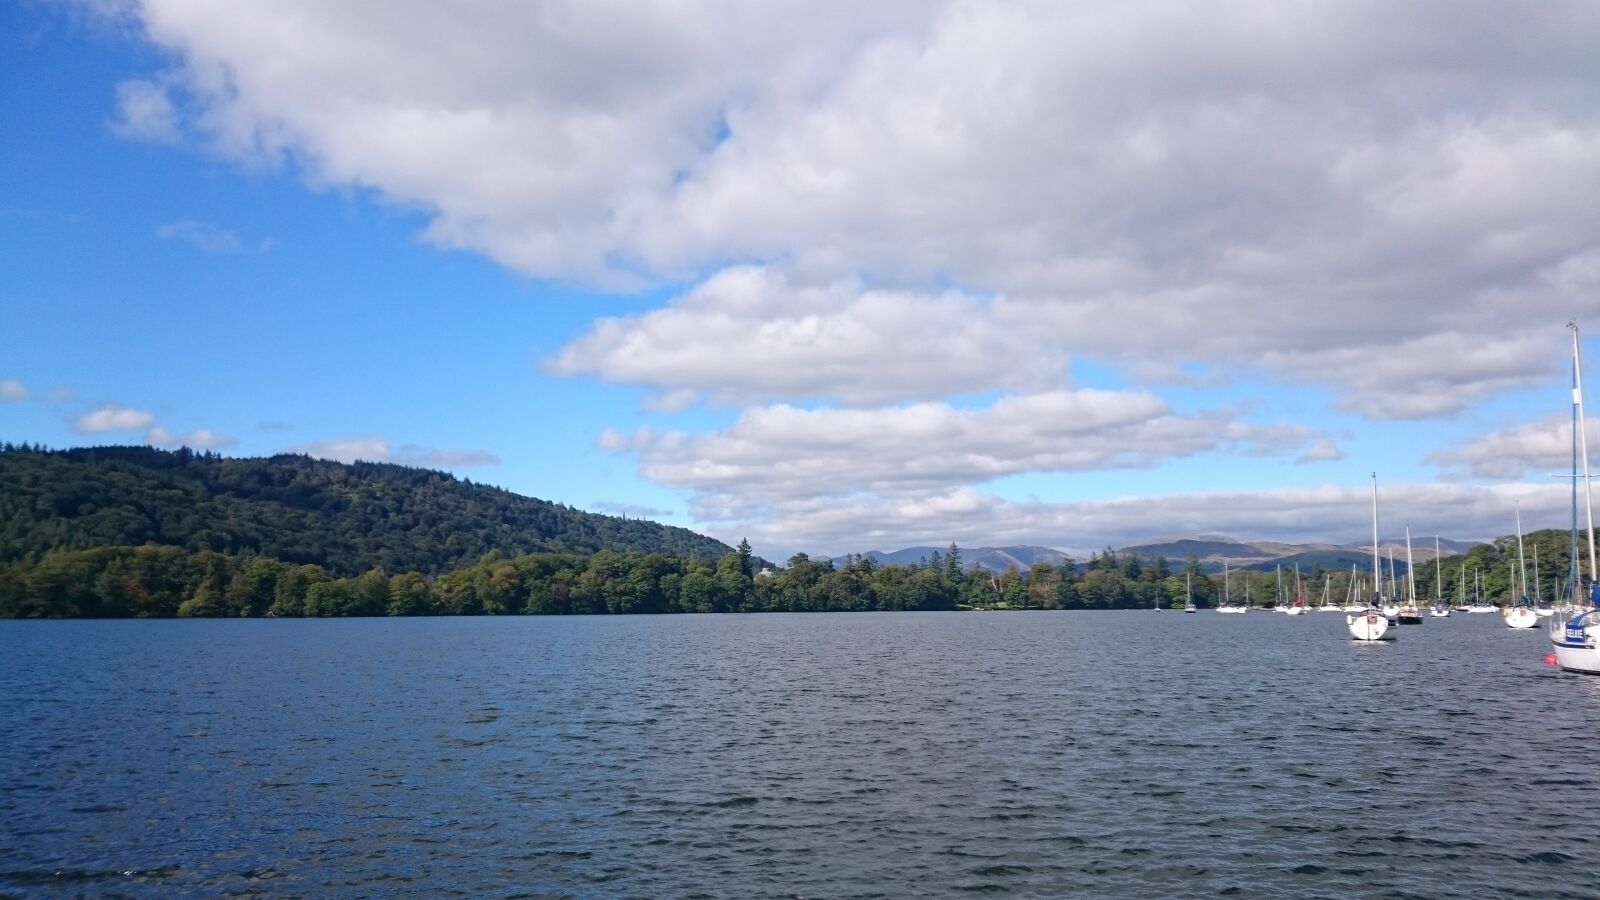 Sony Xperia Z3 Compact sample photo. Lake, windermere, nature photography